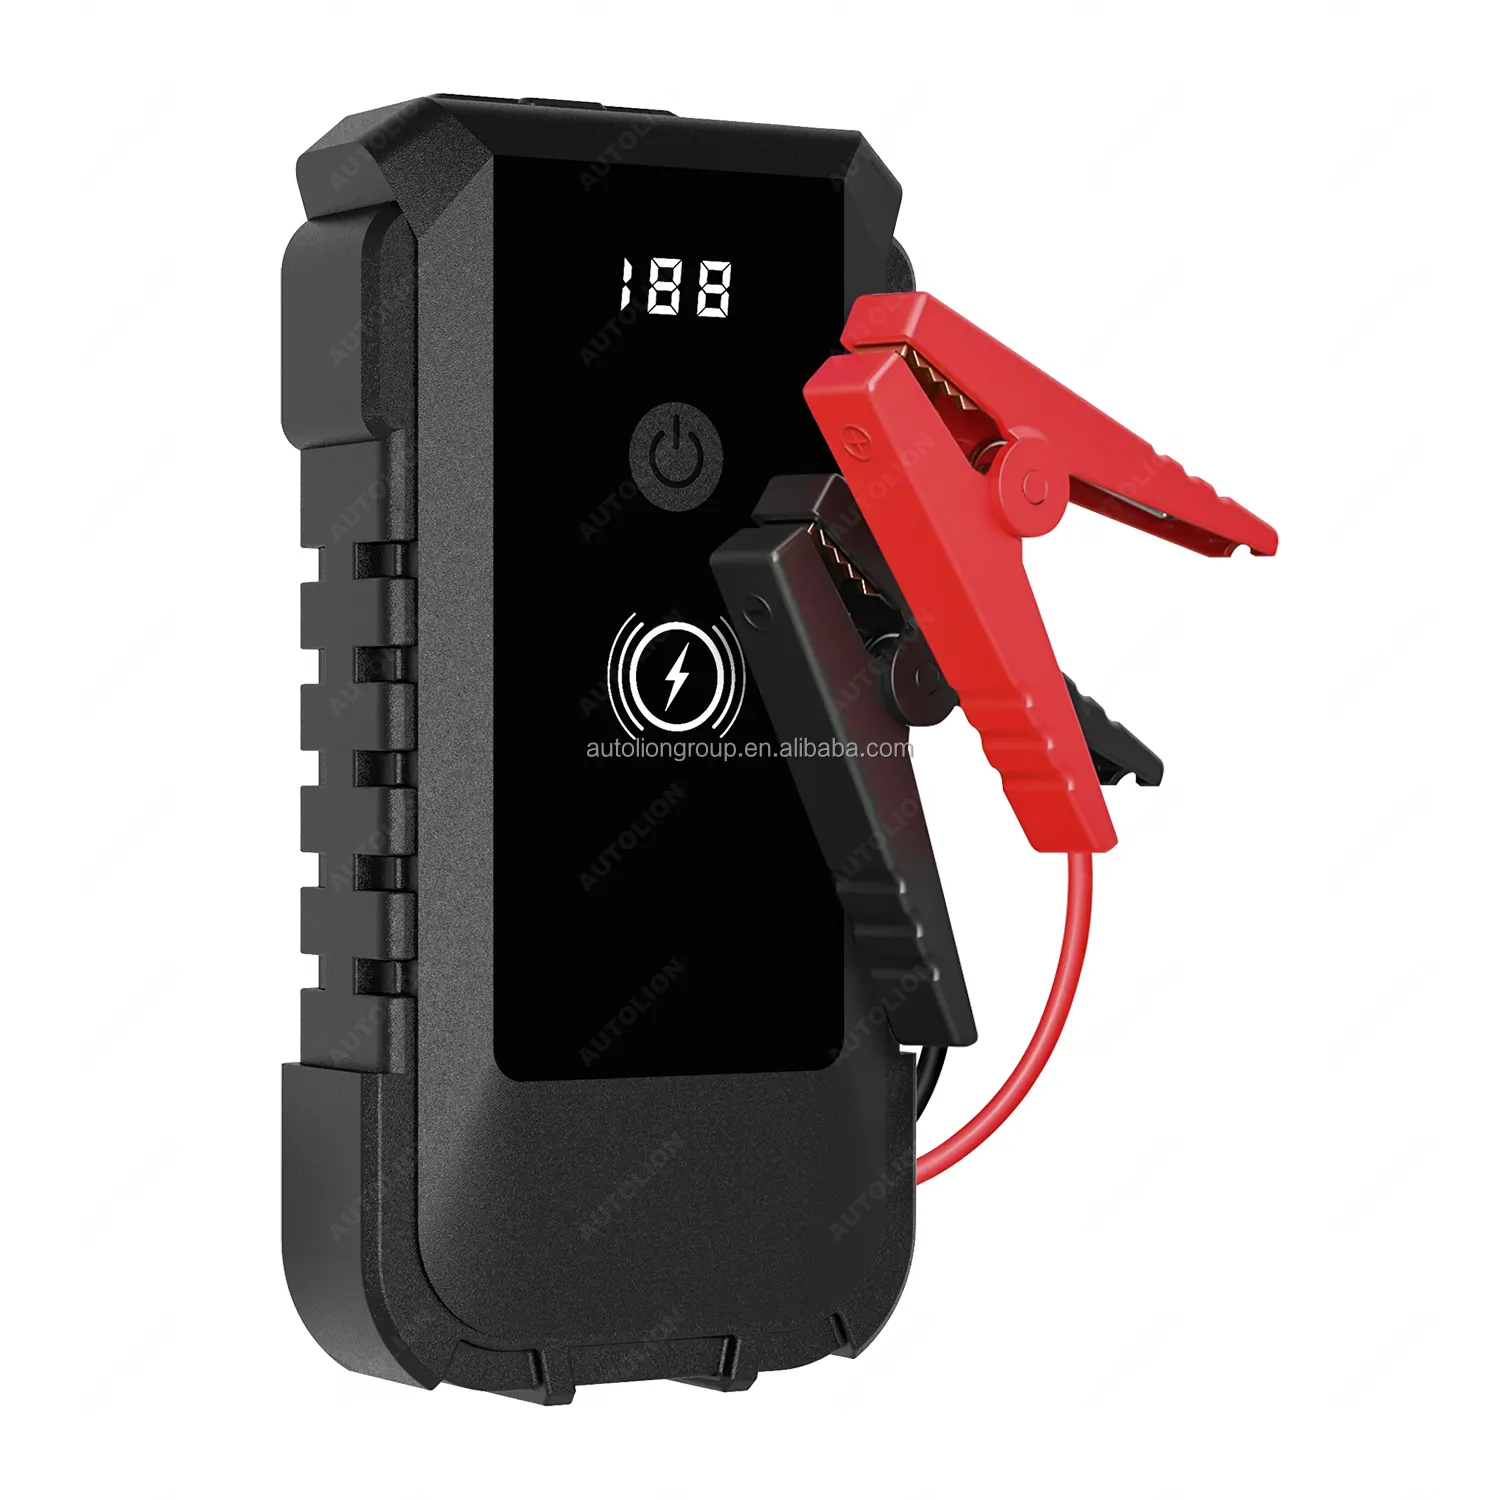 Powerful 16800mAh 15W phone wireless car charger 12v portable car battery booster jump starter